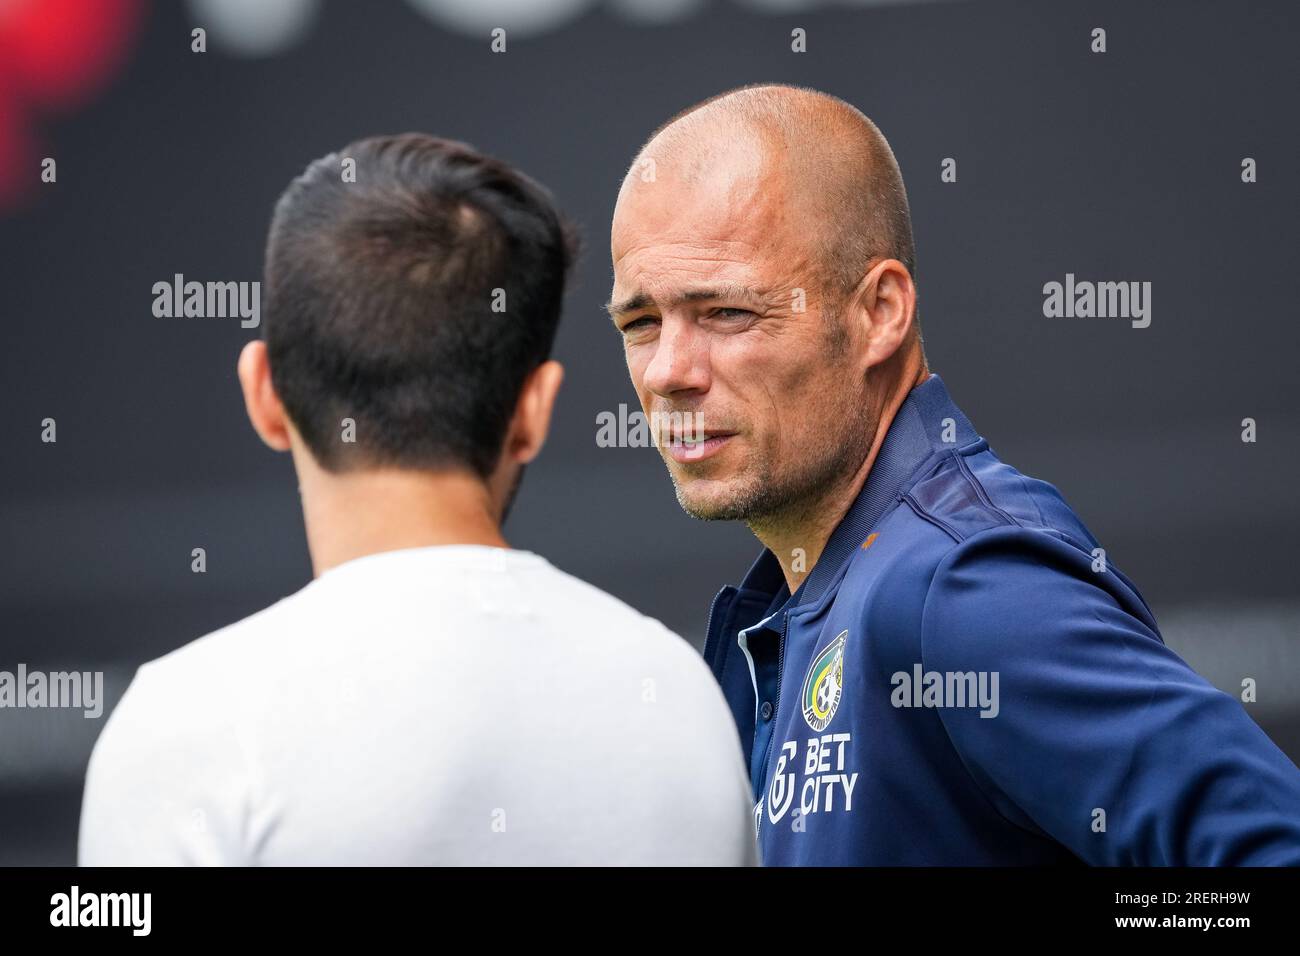 Taunusstein Wehen, Germany. 22nd July, 2023. TAUNUSSTEIN-WEHEN, GERMANY - JULY 22: Coach Danny Buijs of Fortuna Sittard during the Pre-Season Friendly match between SV Wehen Wiesbaden and Fortuna Sittard at the BRITA-Arena on July 22, 2023 in Taunusstein-Wehen, Germany (Photo by Orange Pictures) Credit: Orange Pics BV/Alamy Live News Stock Photo